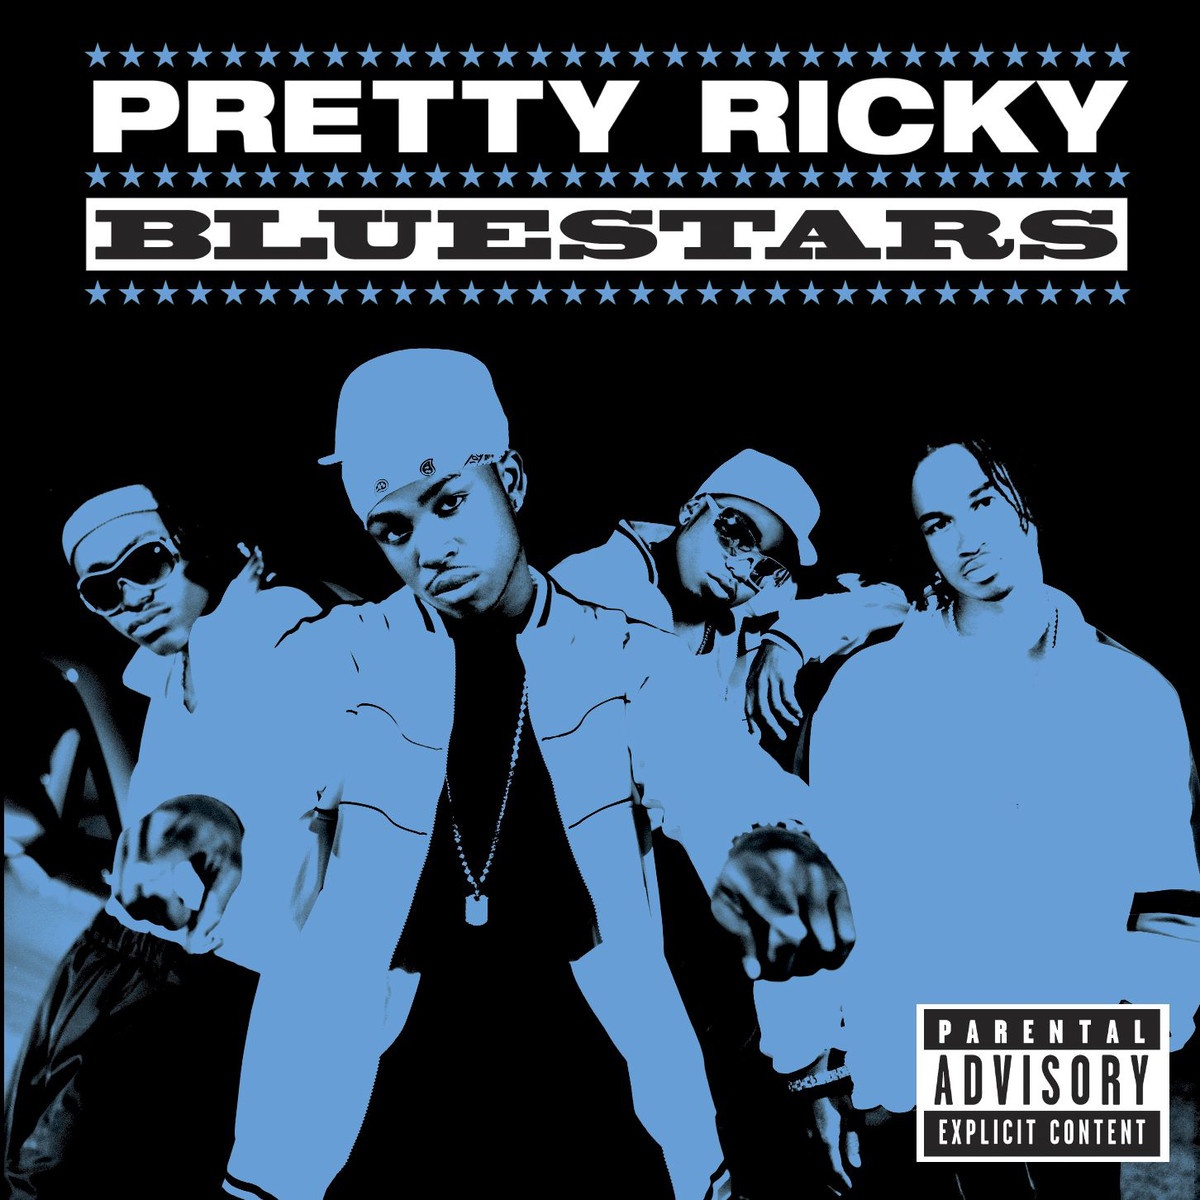 Juicy featuring Static Major (Amended Version)